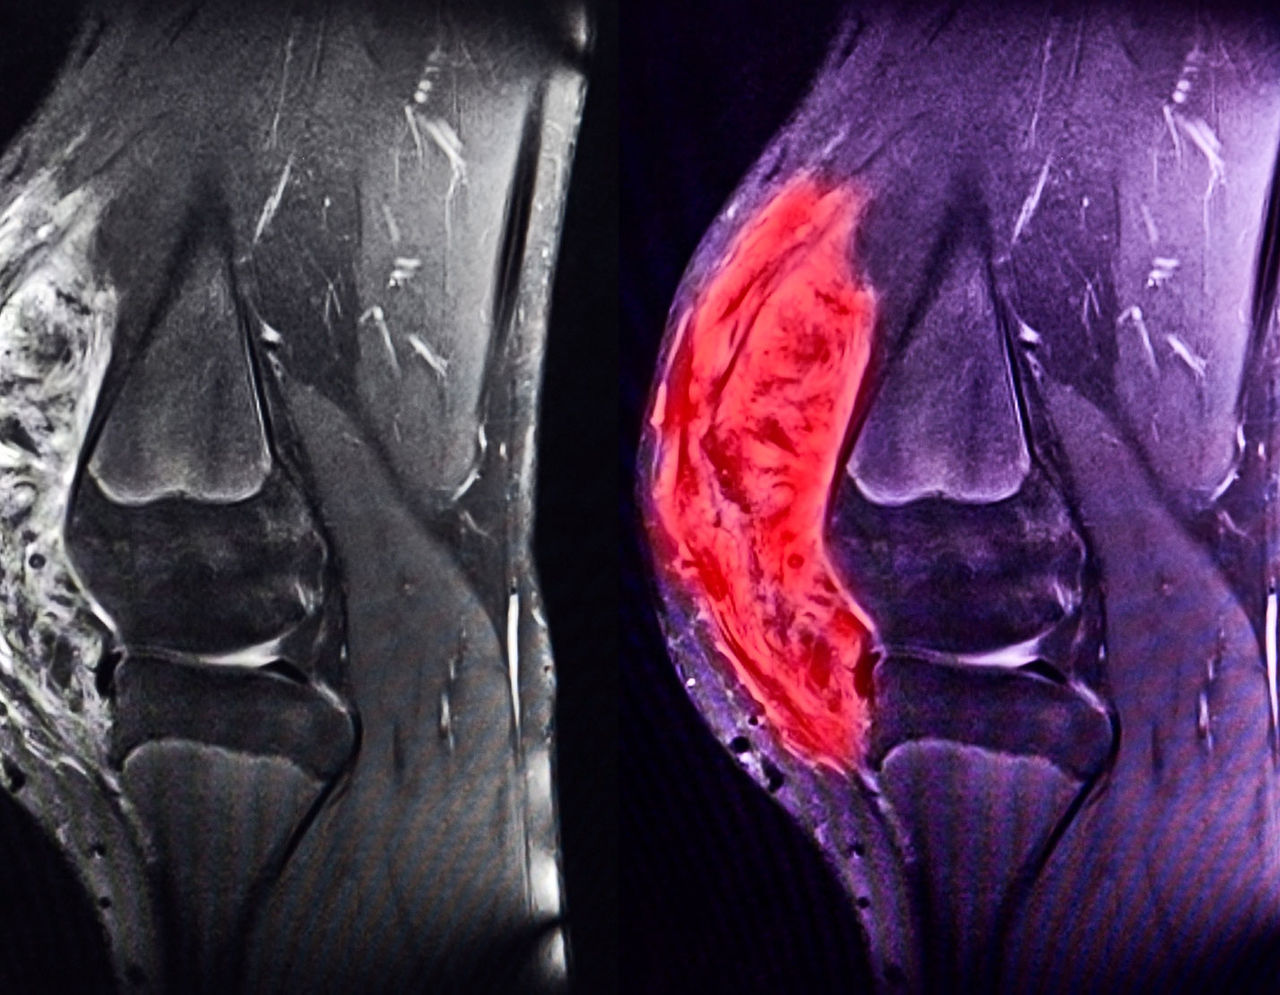 MRI scans showing a sarcoma of the knee